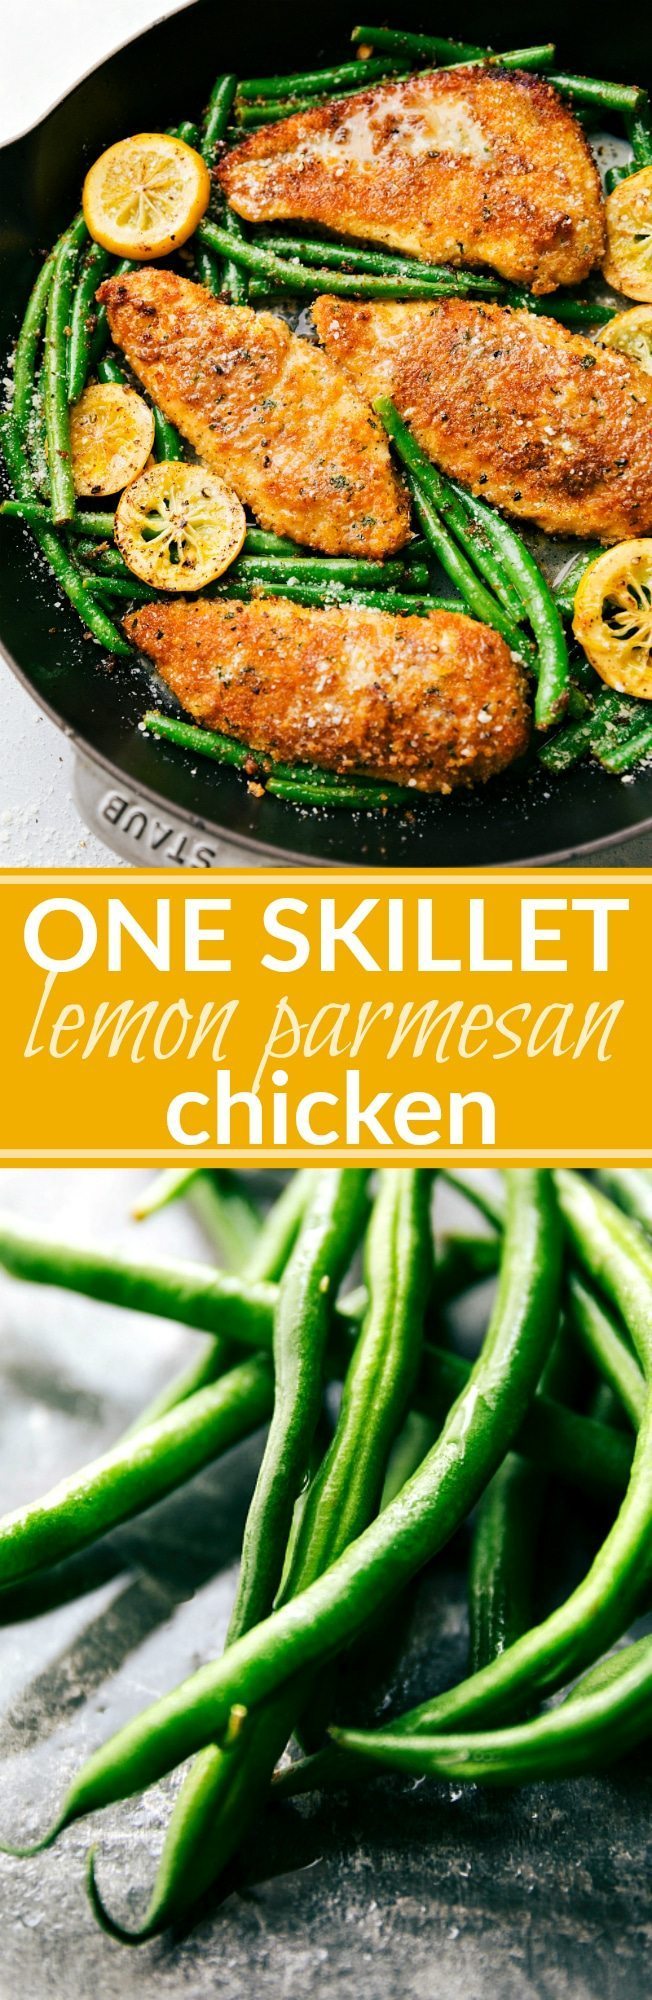 ONE SKILLET easy lemon parmesan chicken and veggies! Delicious and quick to make; 30-minute meal with little clean-up! via chelseasmessyapron.com